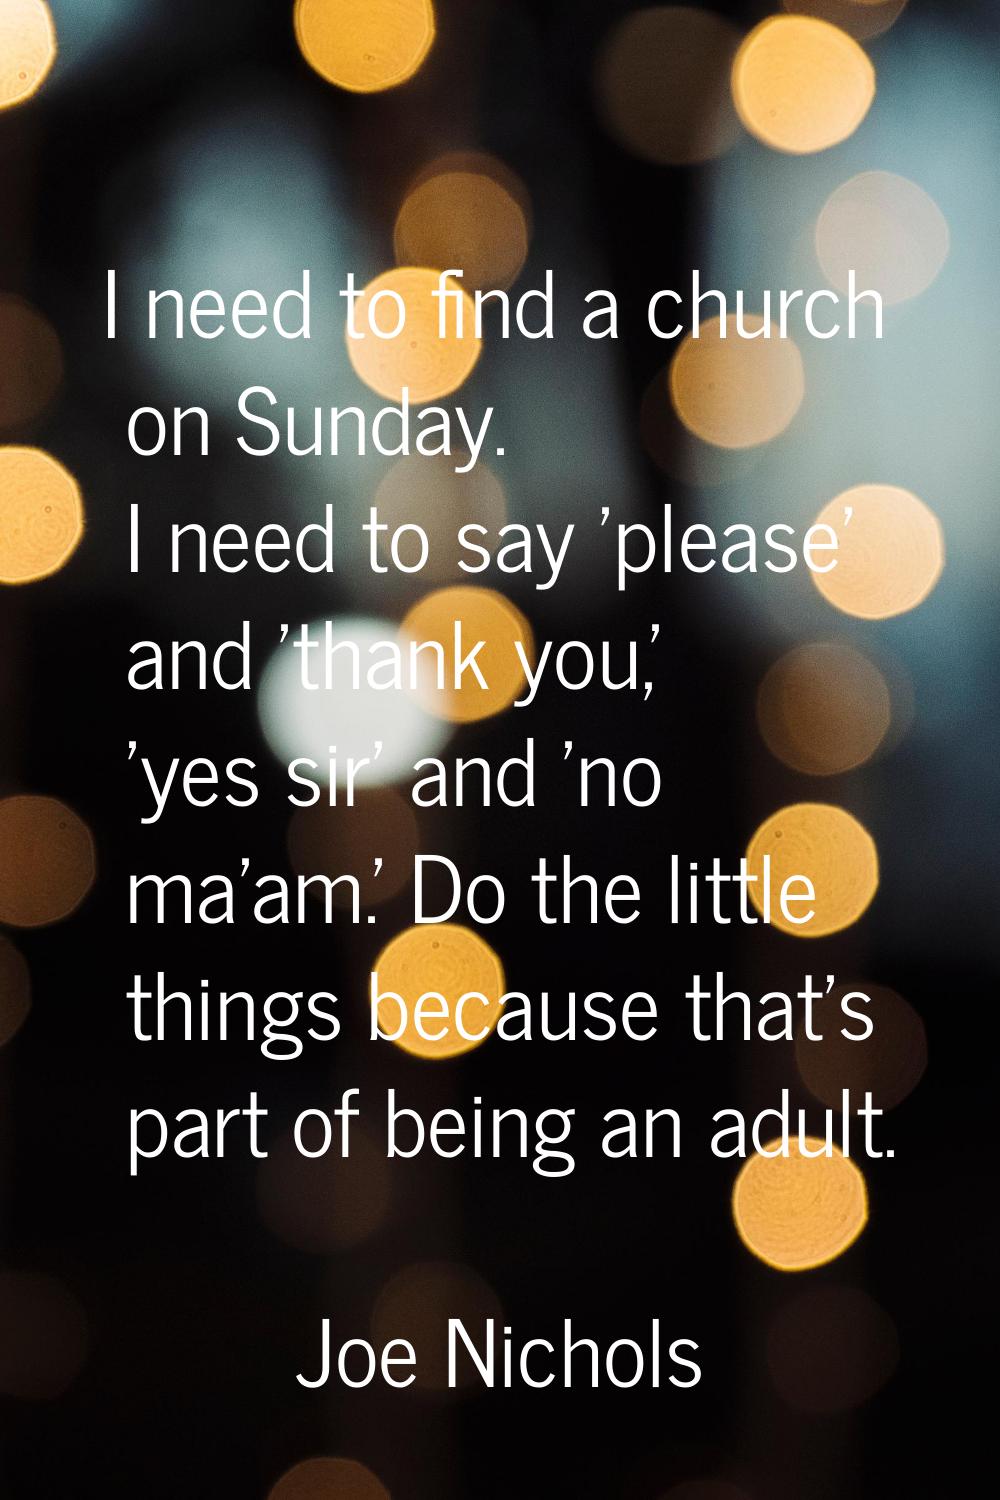 I need to find a church on Sunday. I need to say 'please' and 'thank you,' 'yes sir' and 'no ma'am.